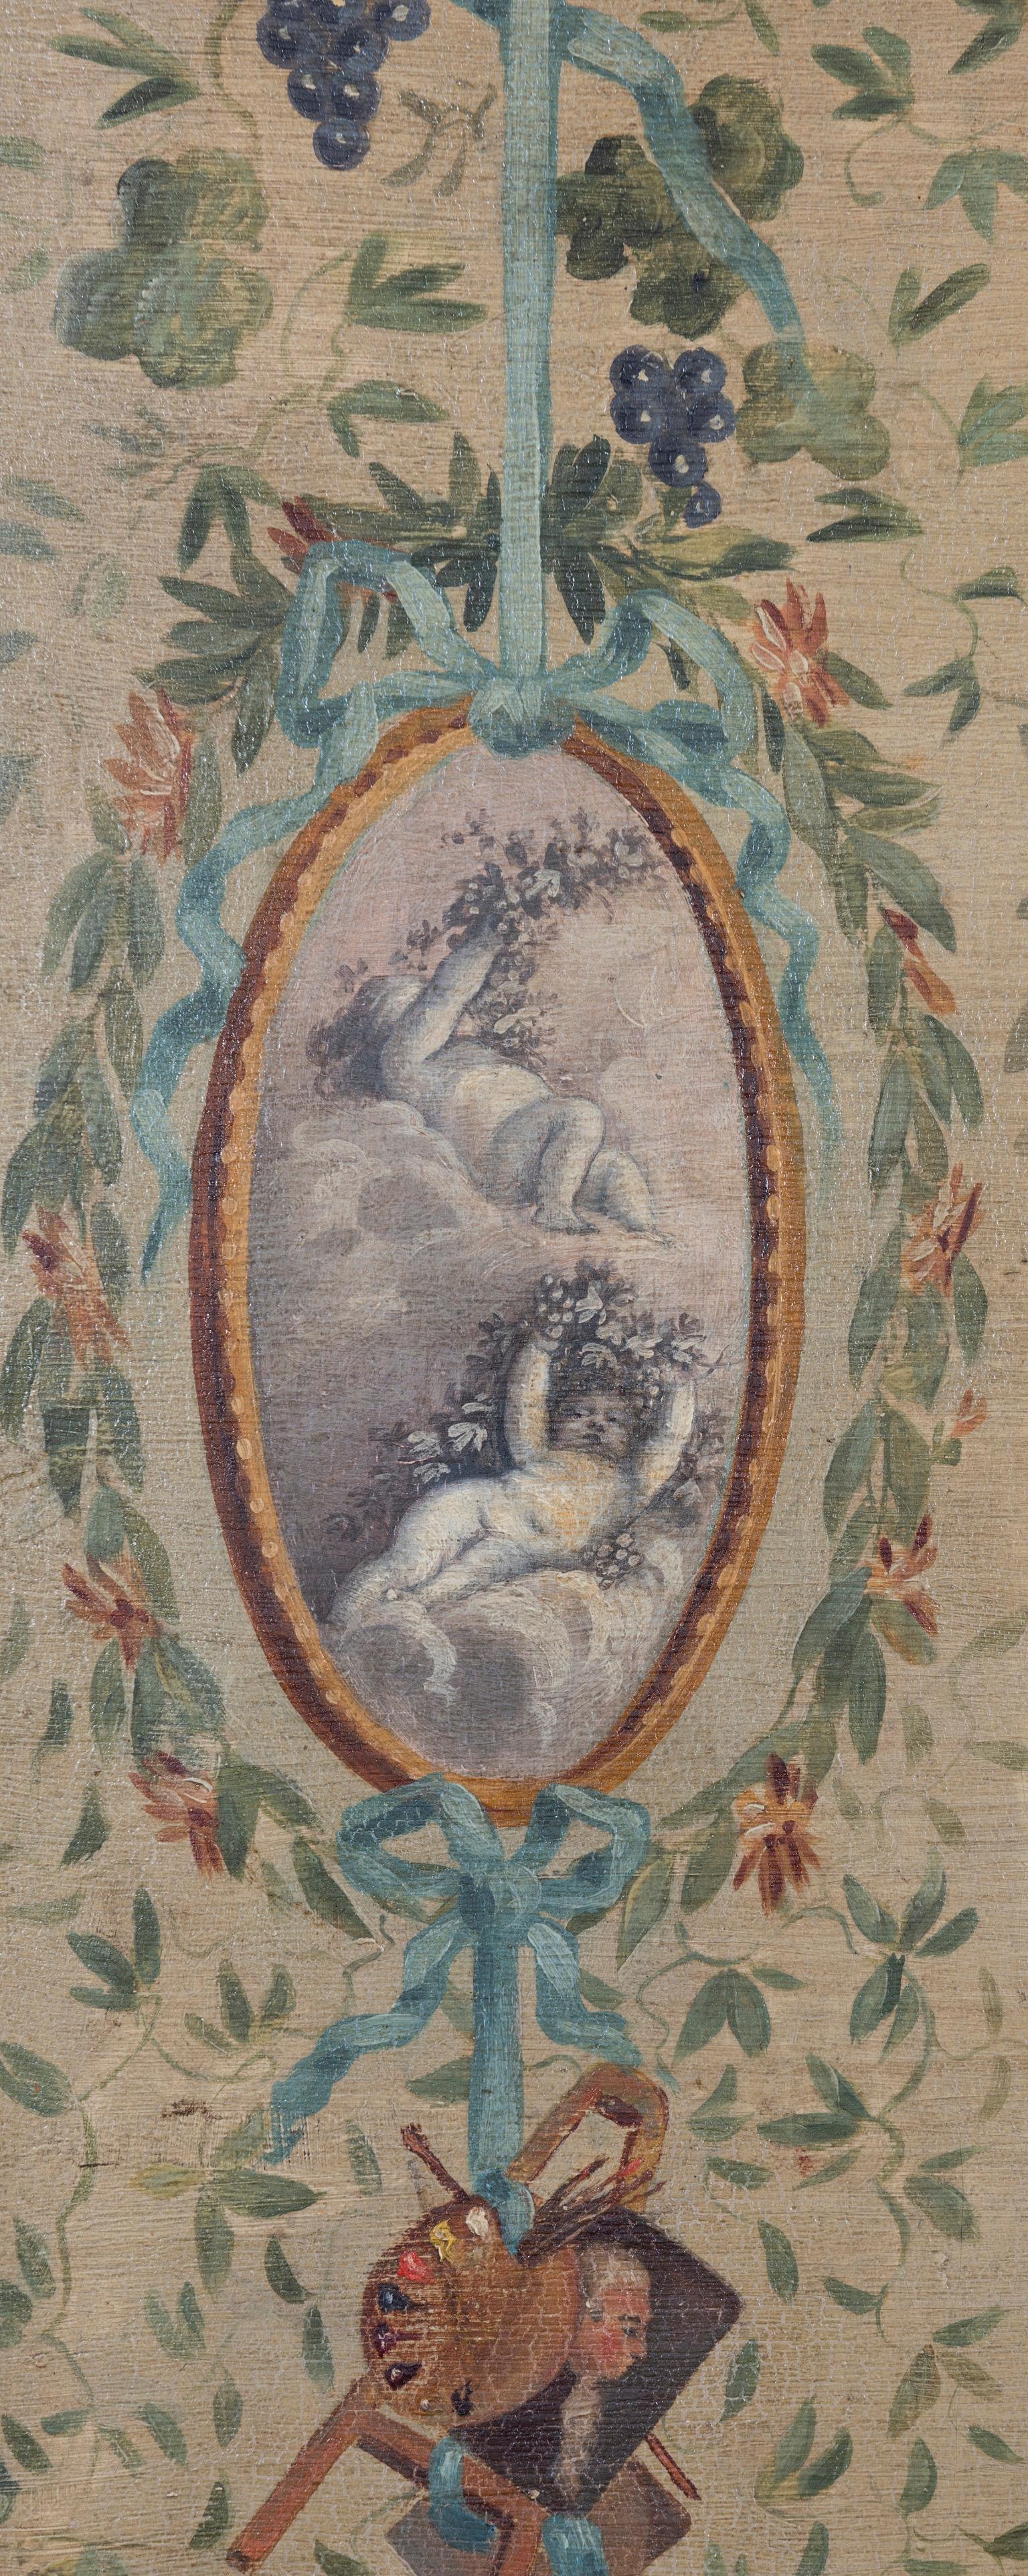 Each panel painted with classical oval shaped medallion depicting putti and surrounded by floral wreath, musical trophies, foliage and ribbons on a pale olive green ground.